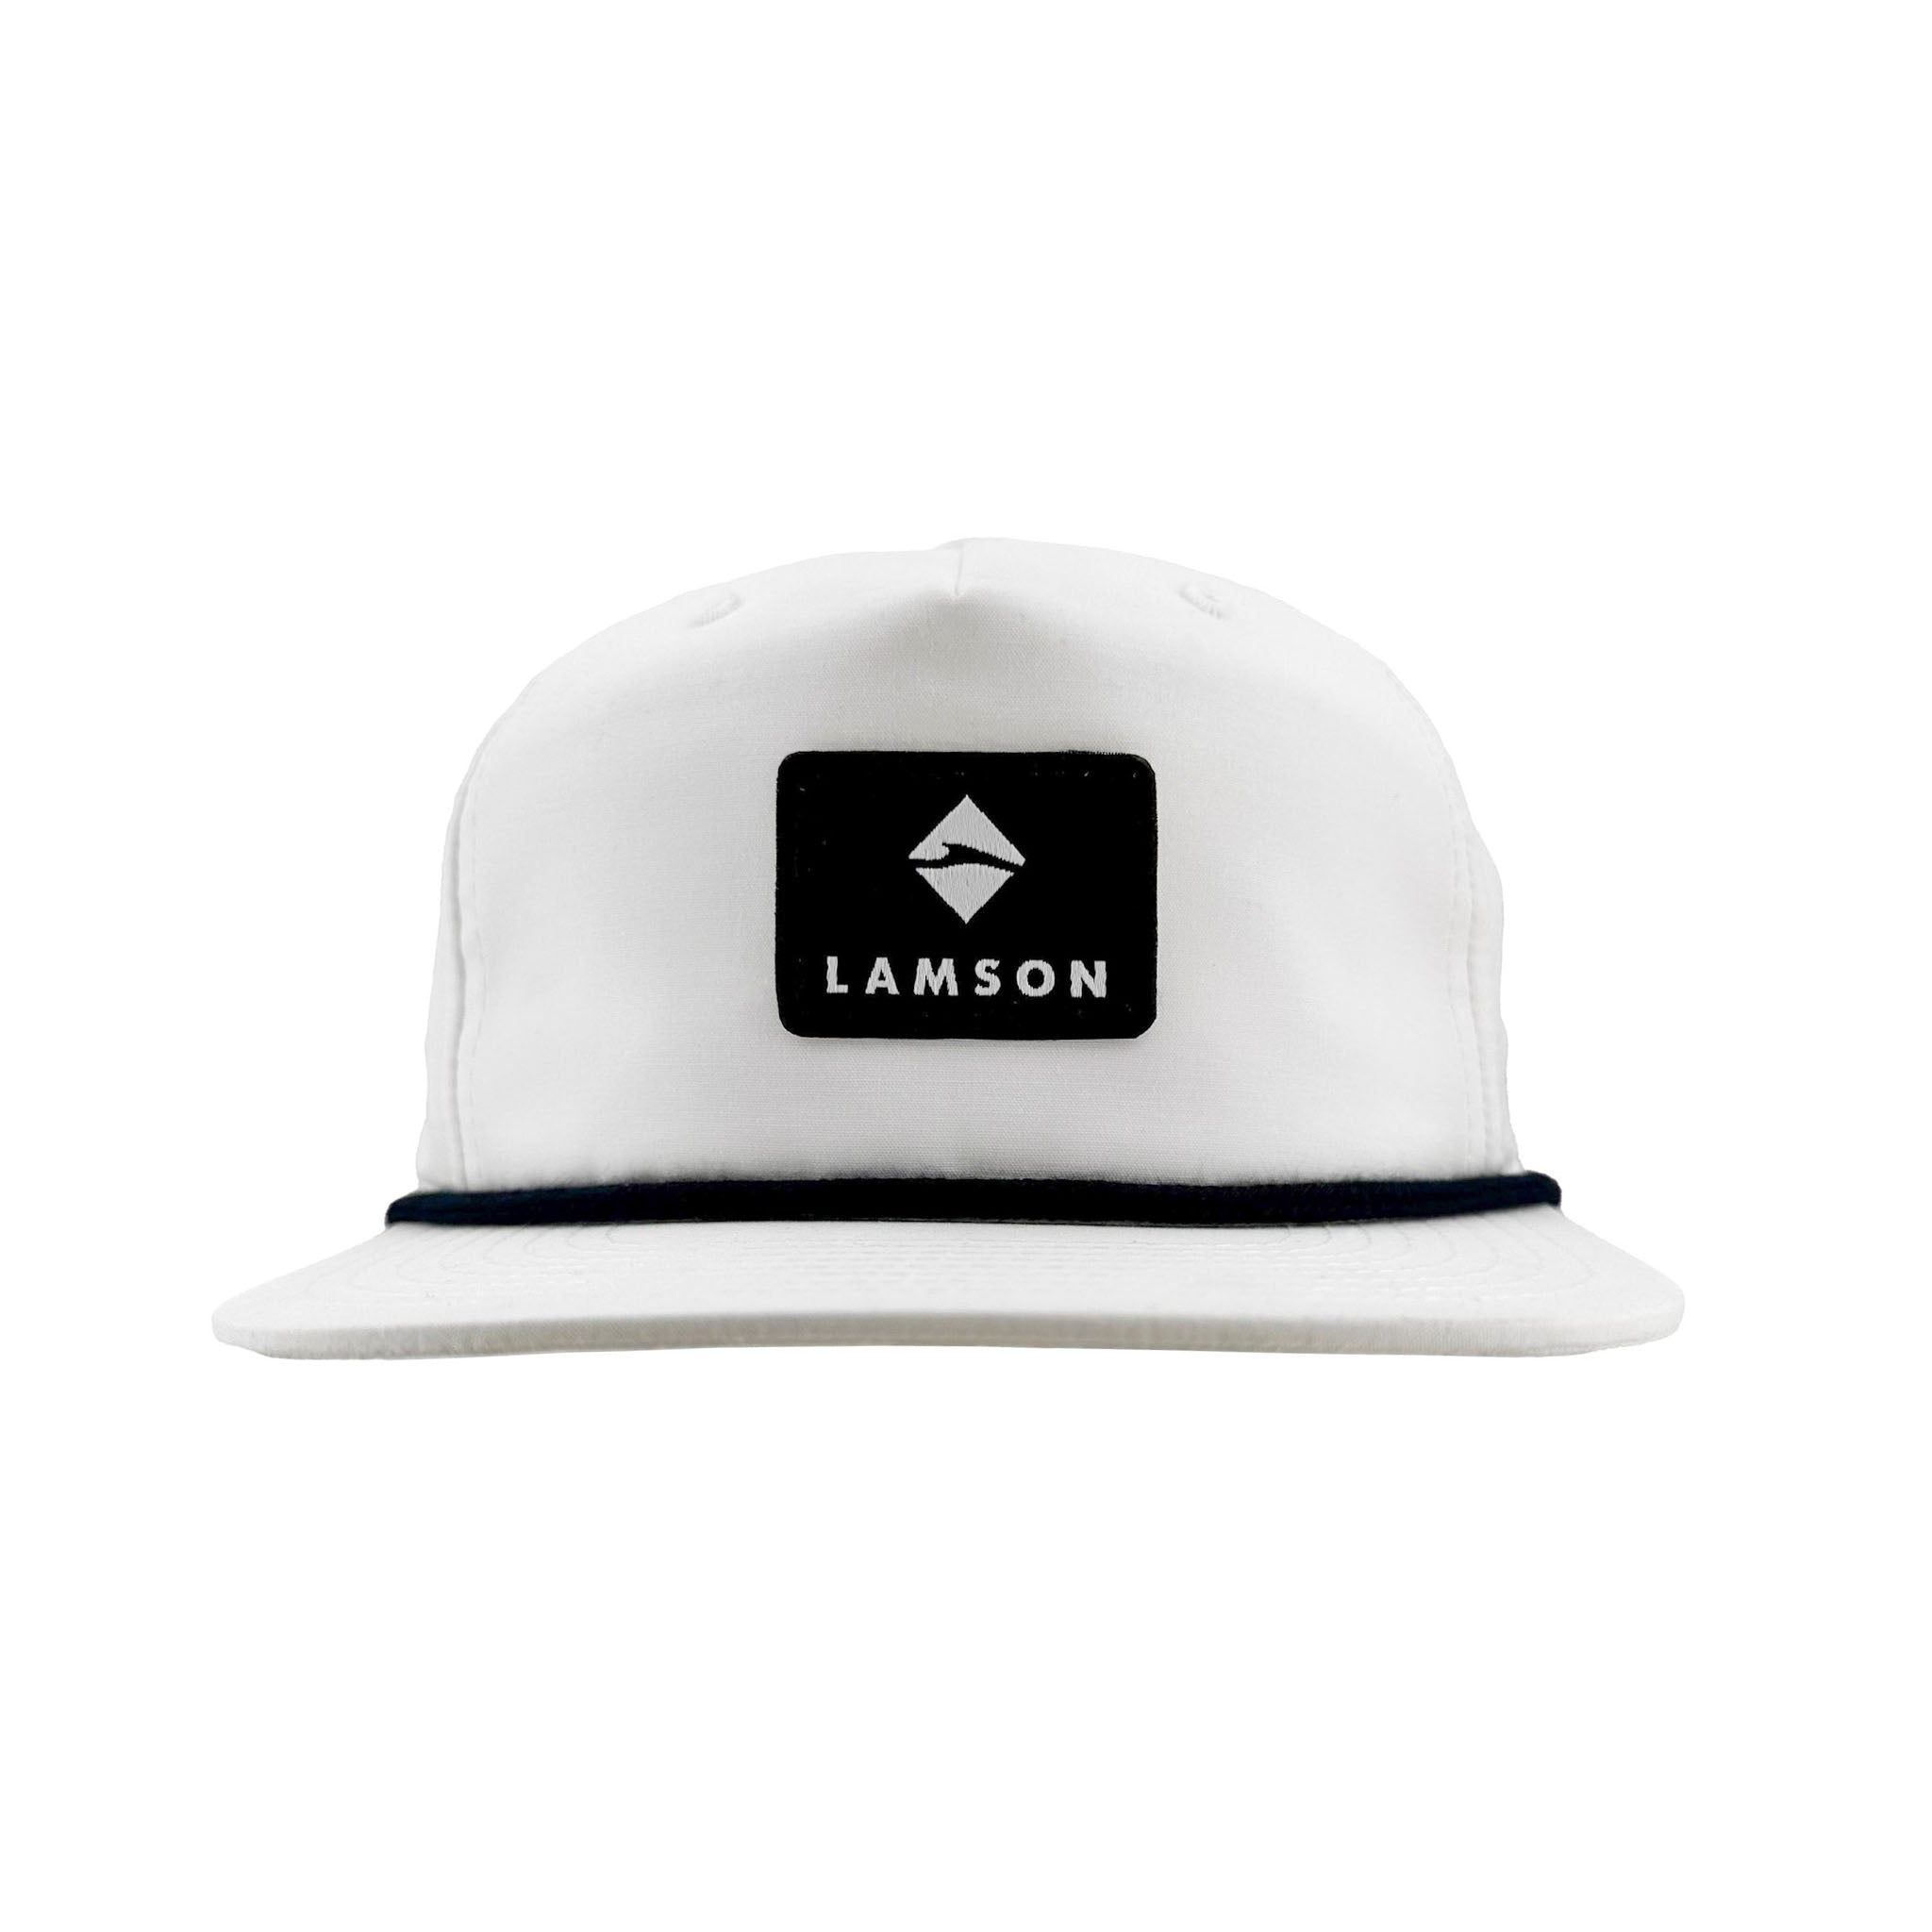 Flat Bill Rope Cap - White With Navy Rope by LAMSON